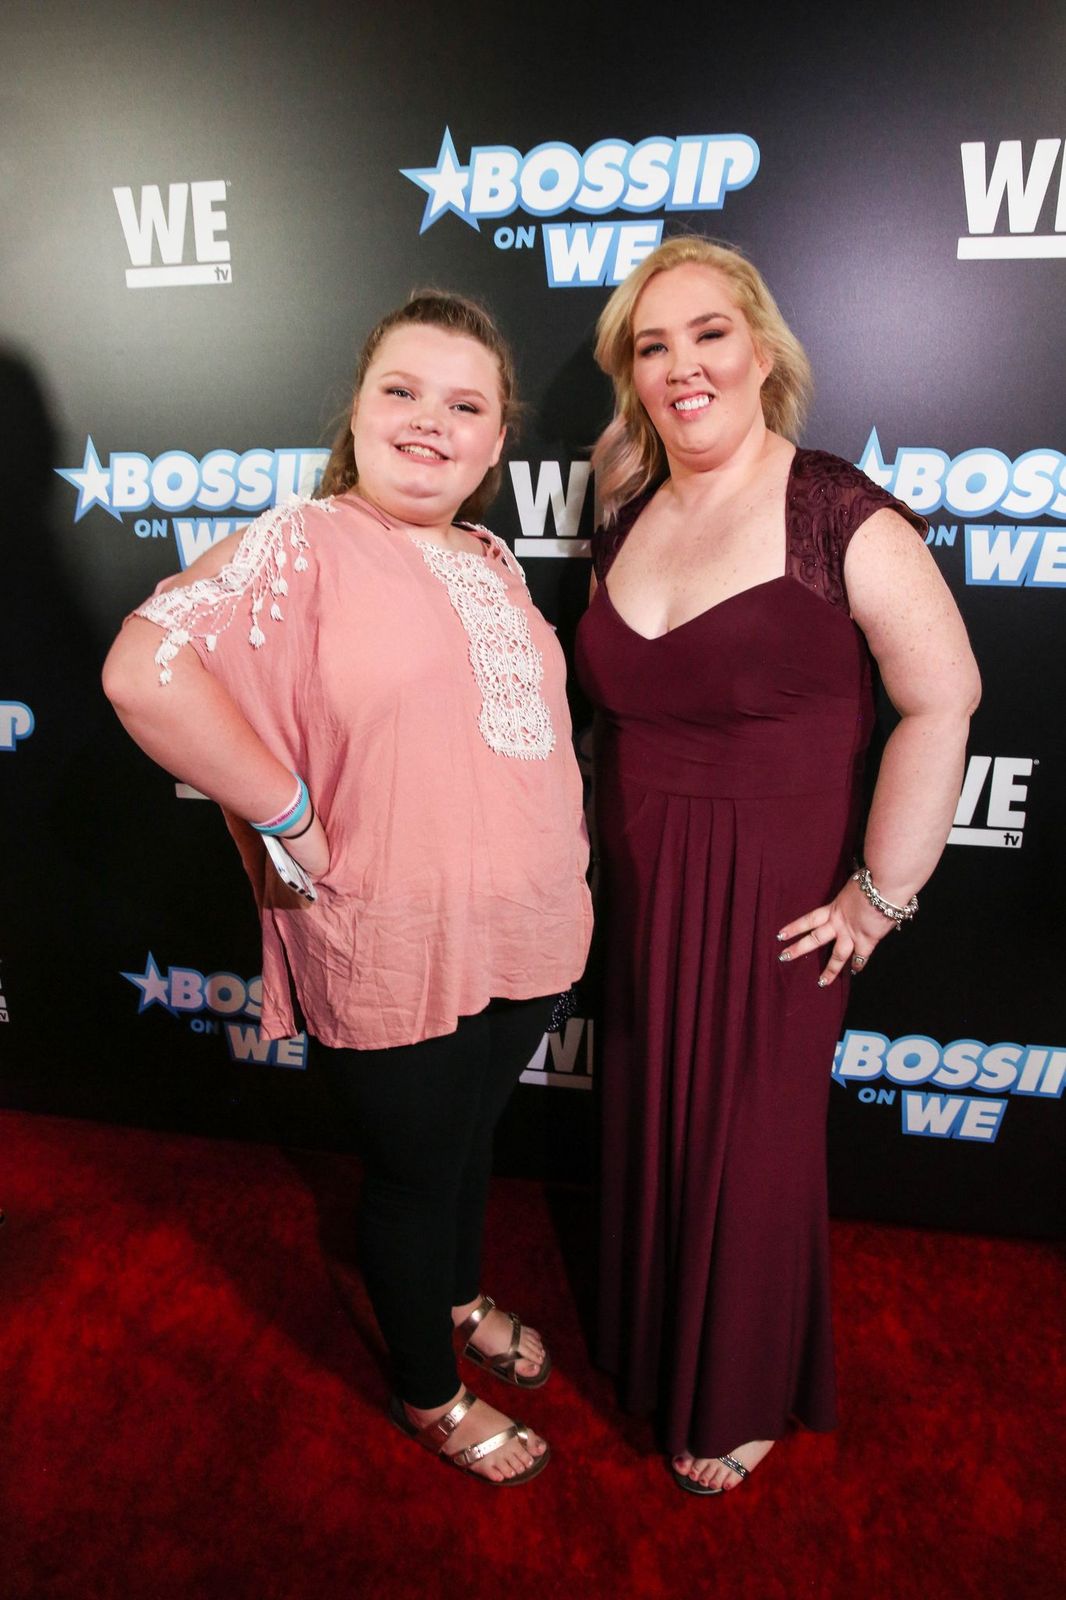 Alana Thompson "Honey Boo Boo" and June Shannon "Mama June" at the 2nd Annual Bossip "Best Dressed List" event on July 31, 2018 | Photo: Getty Images